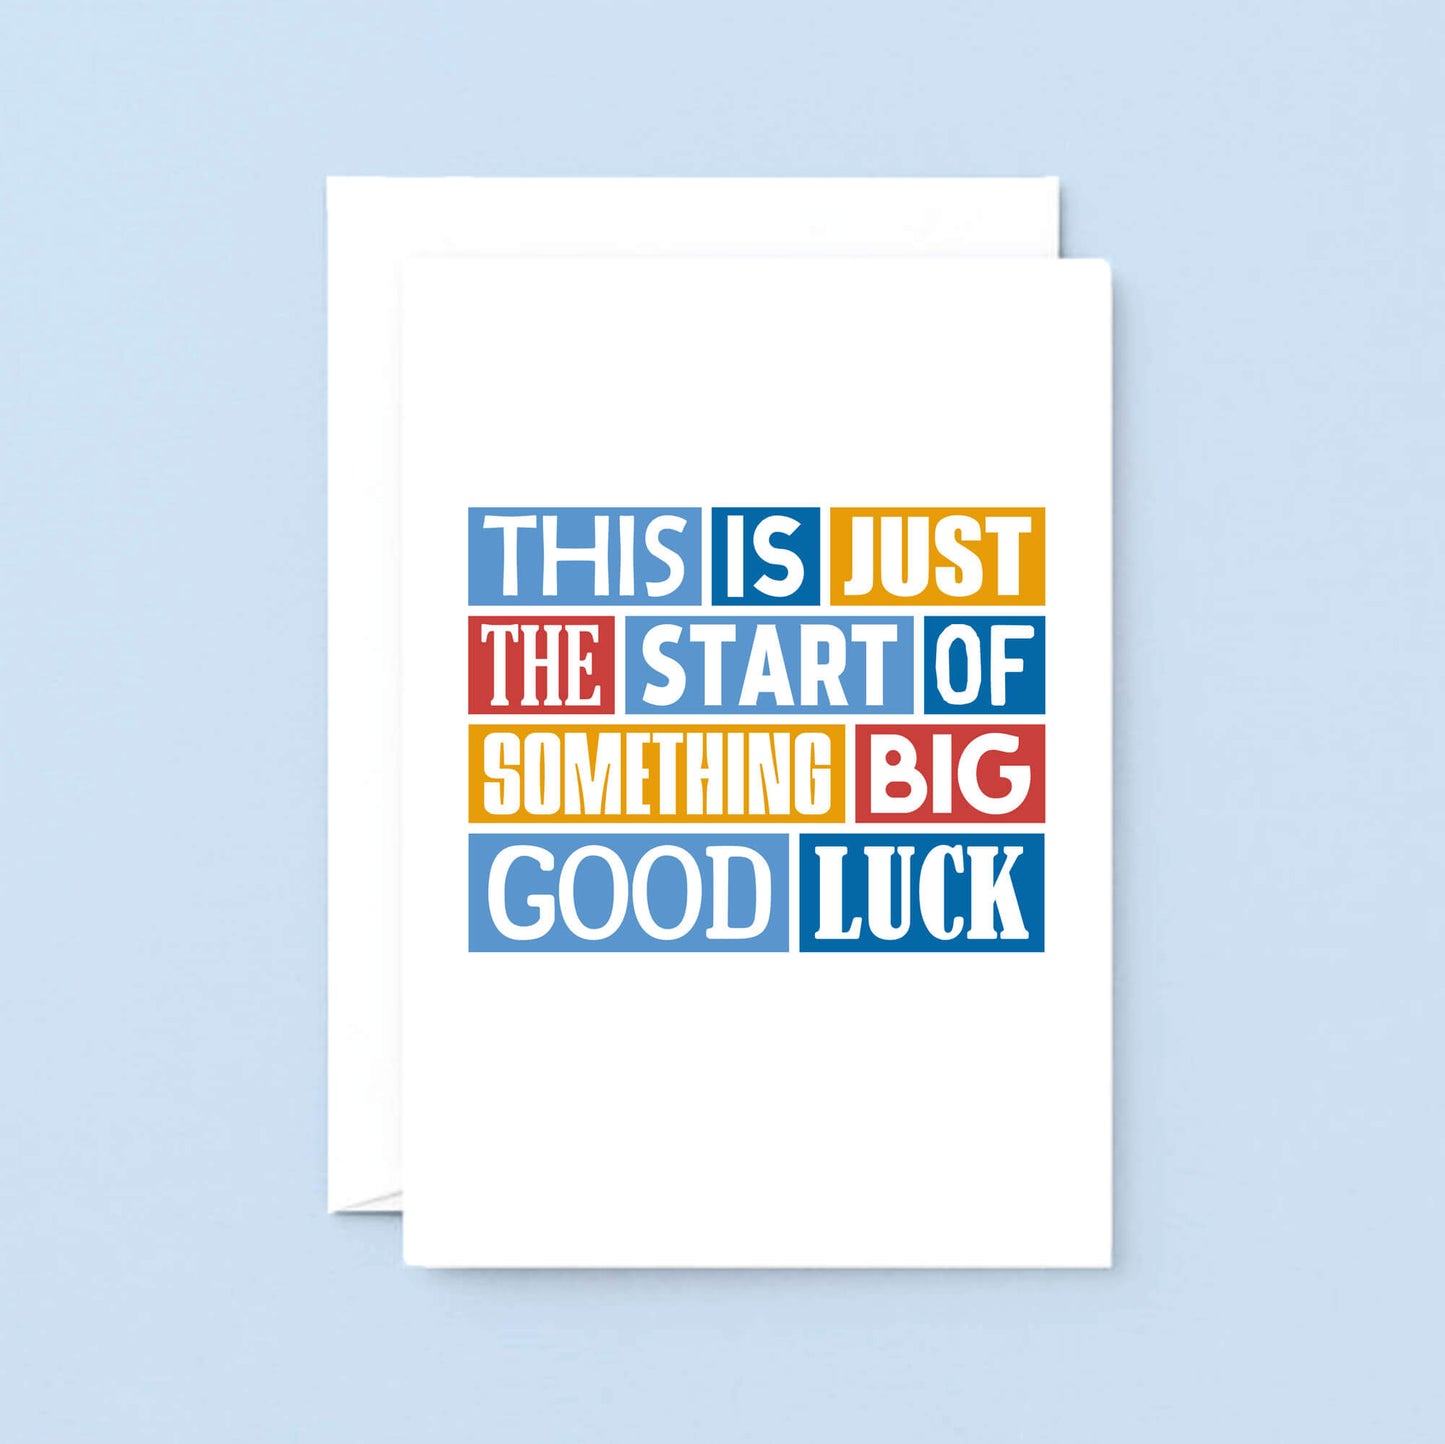 Good Luck Card by SixElevenCreations. Reads This is just the start of something big. Good luck. Product Code SE0085A5